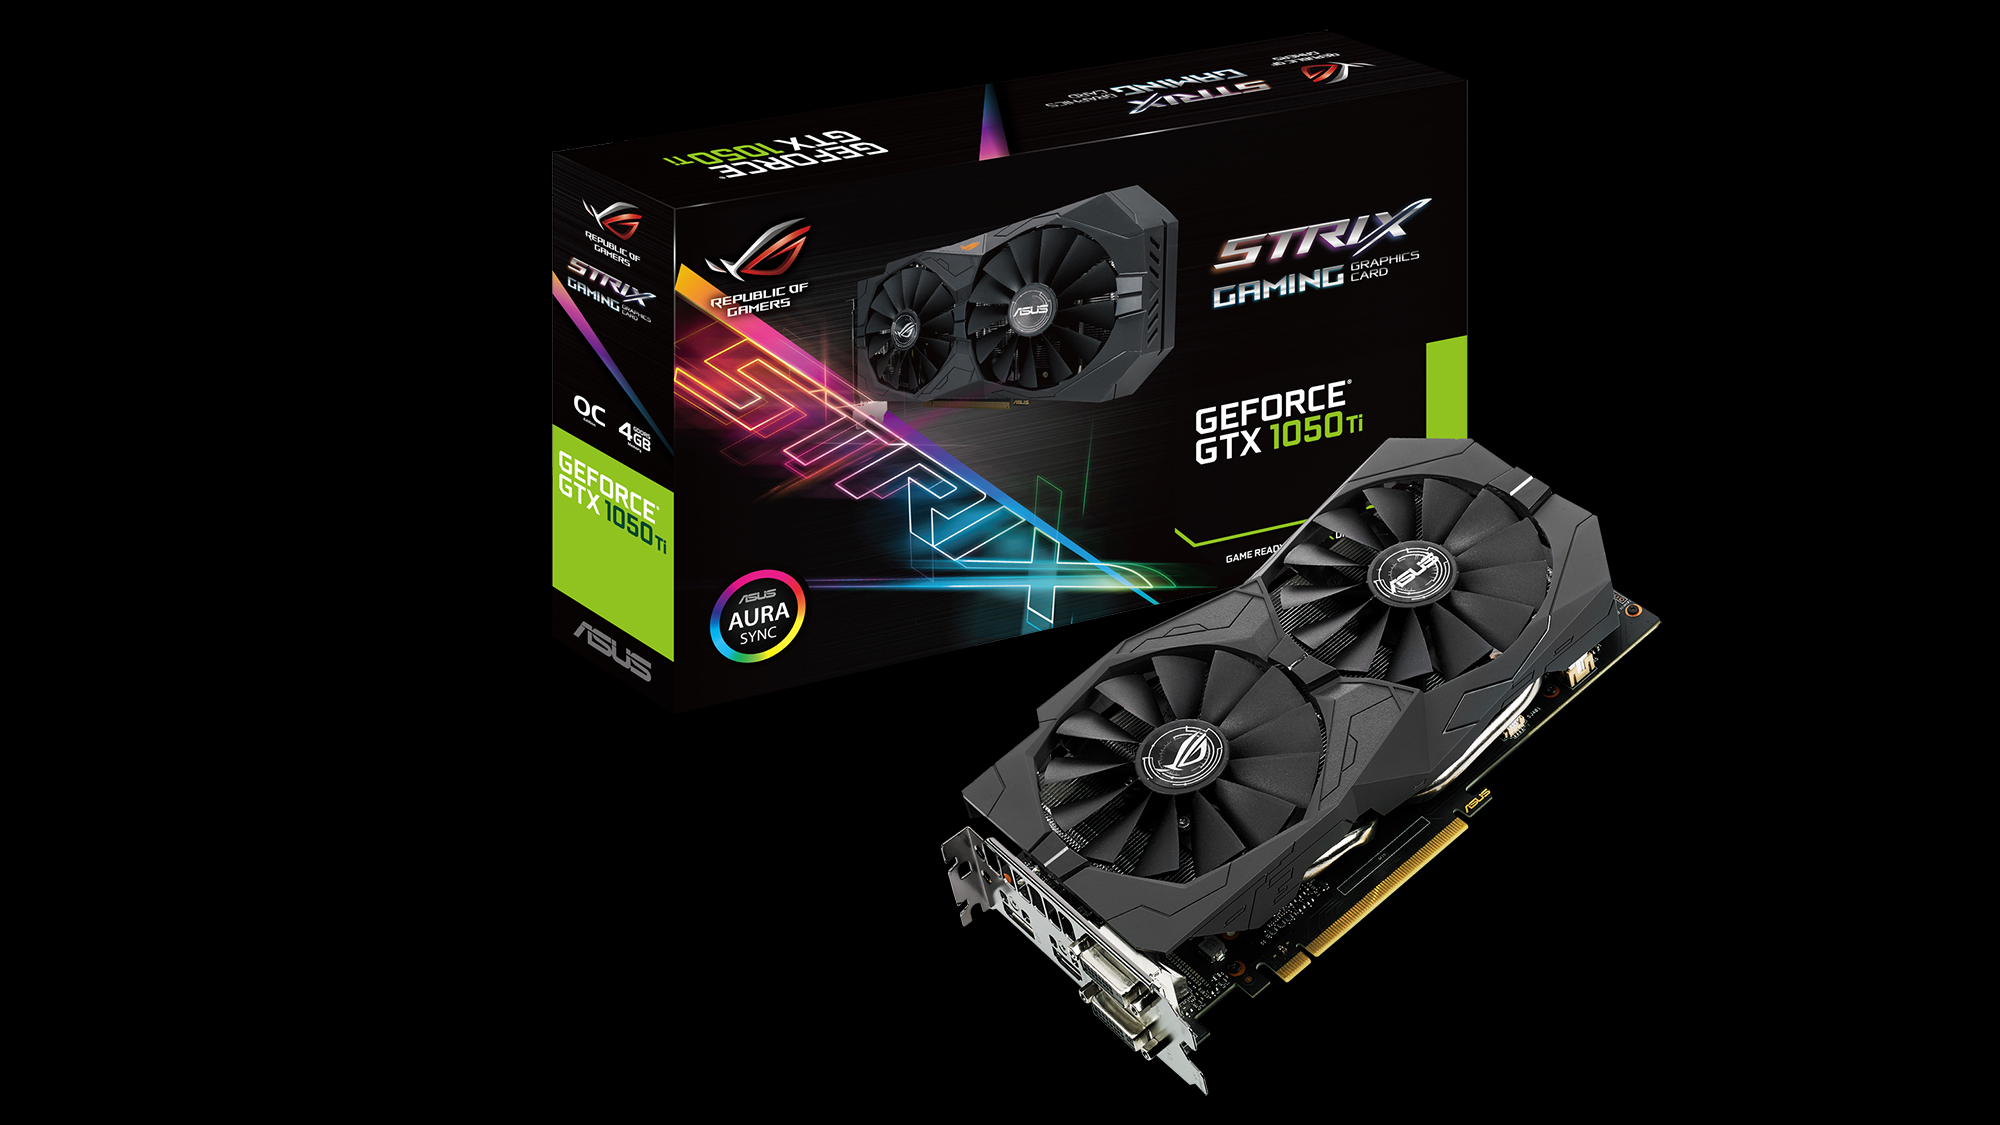 ASUS Announces Latest Line-Up of Graphics Cards Powered by NVIDIA GeForce  GTX 1050 GPUs | ROG - Republic of Gamers Global